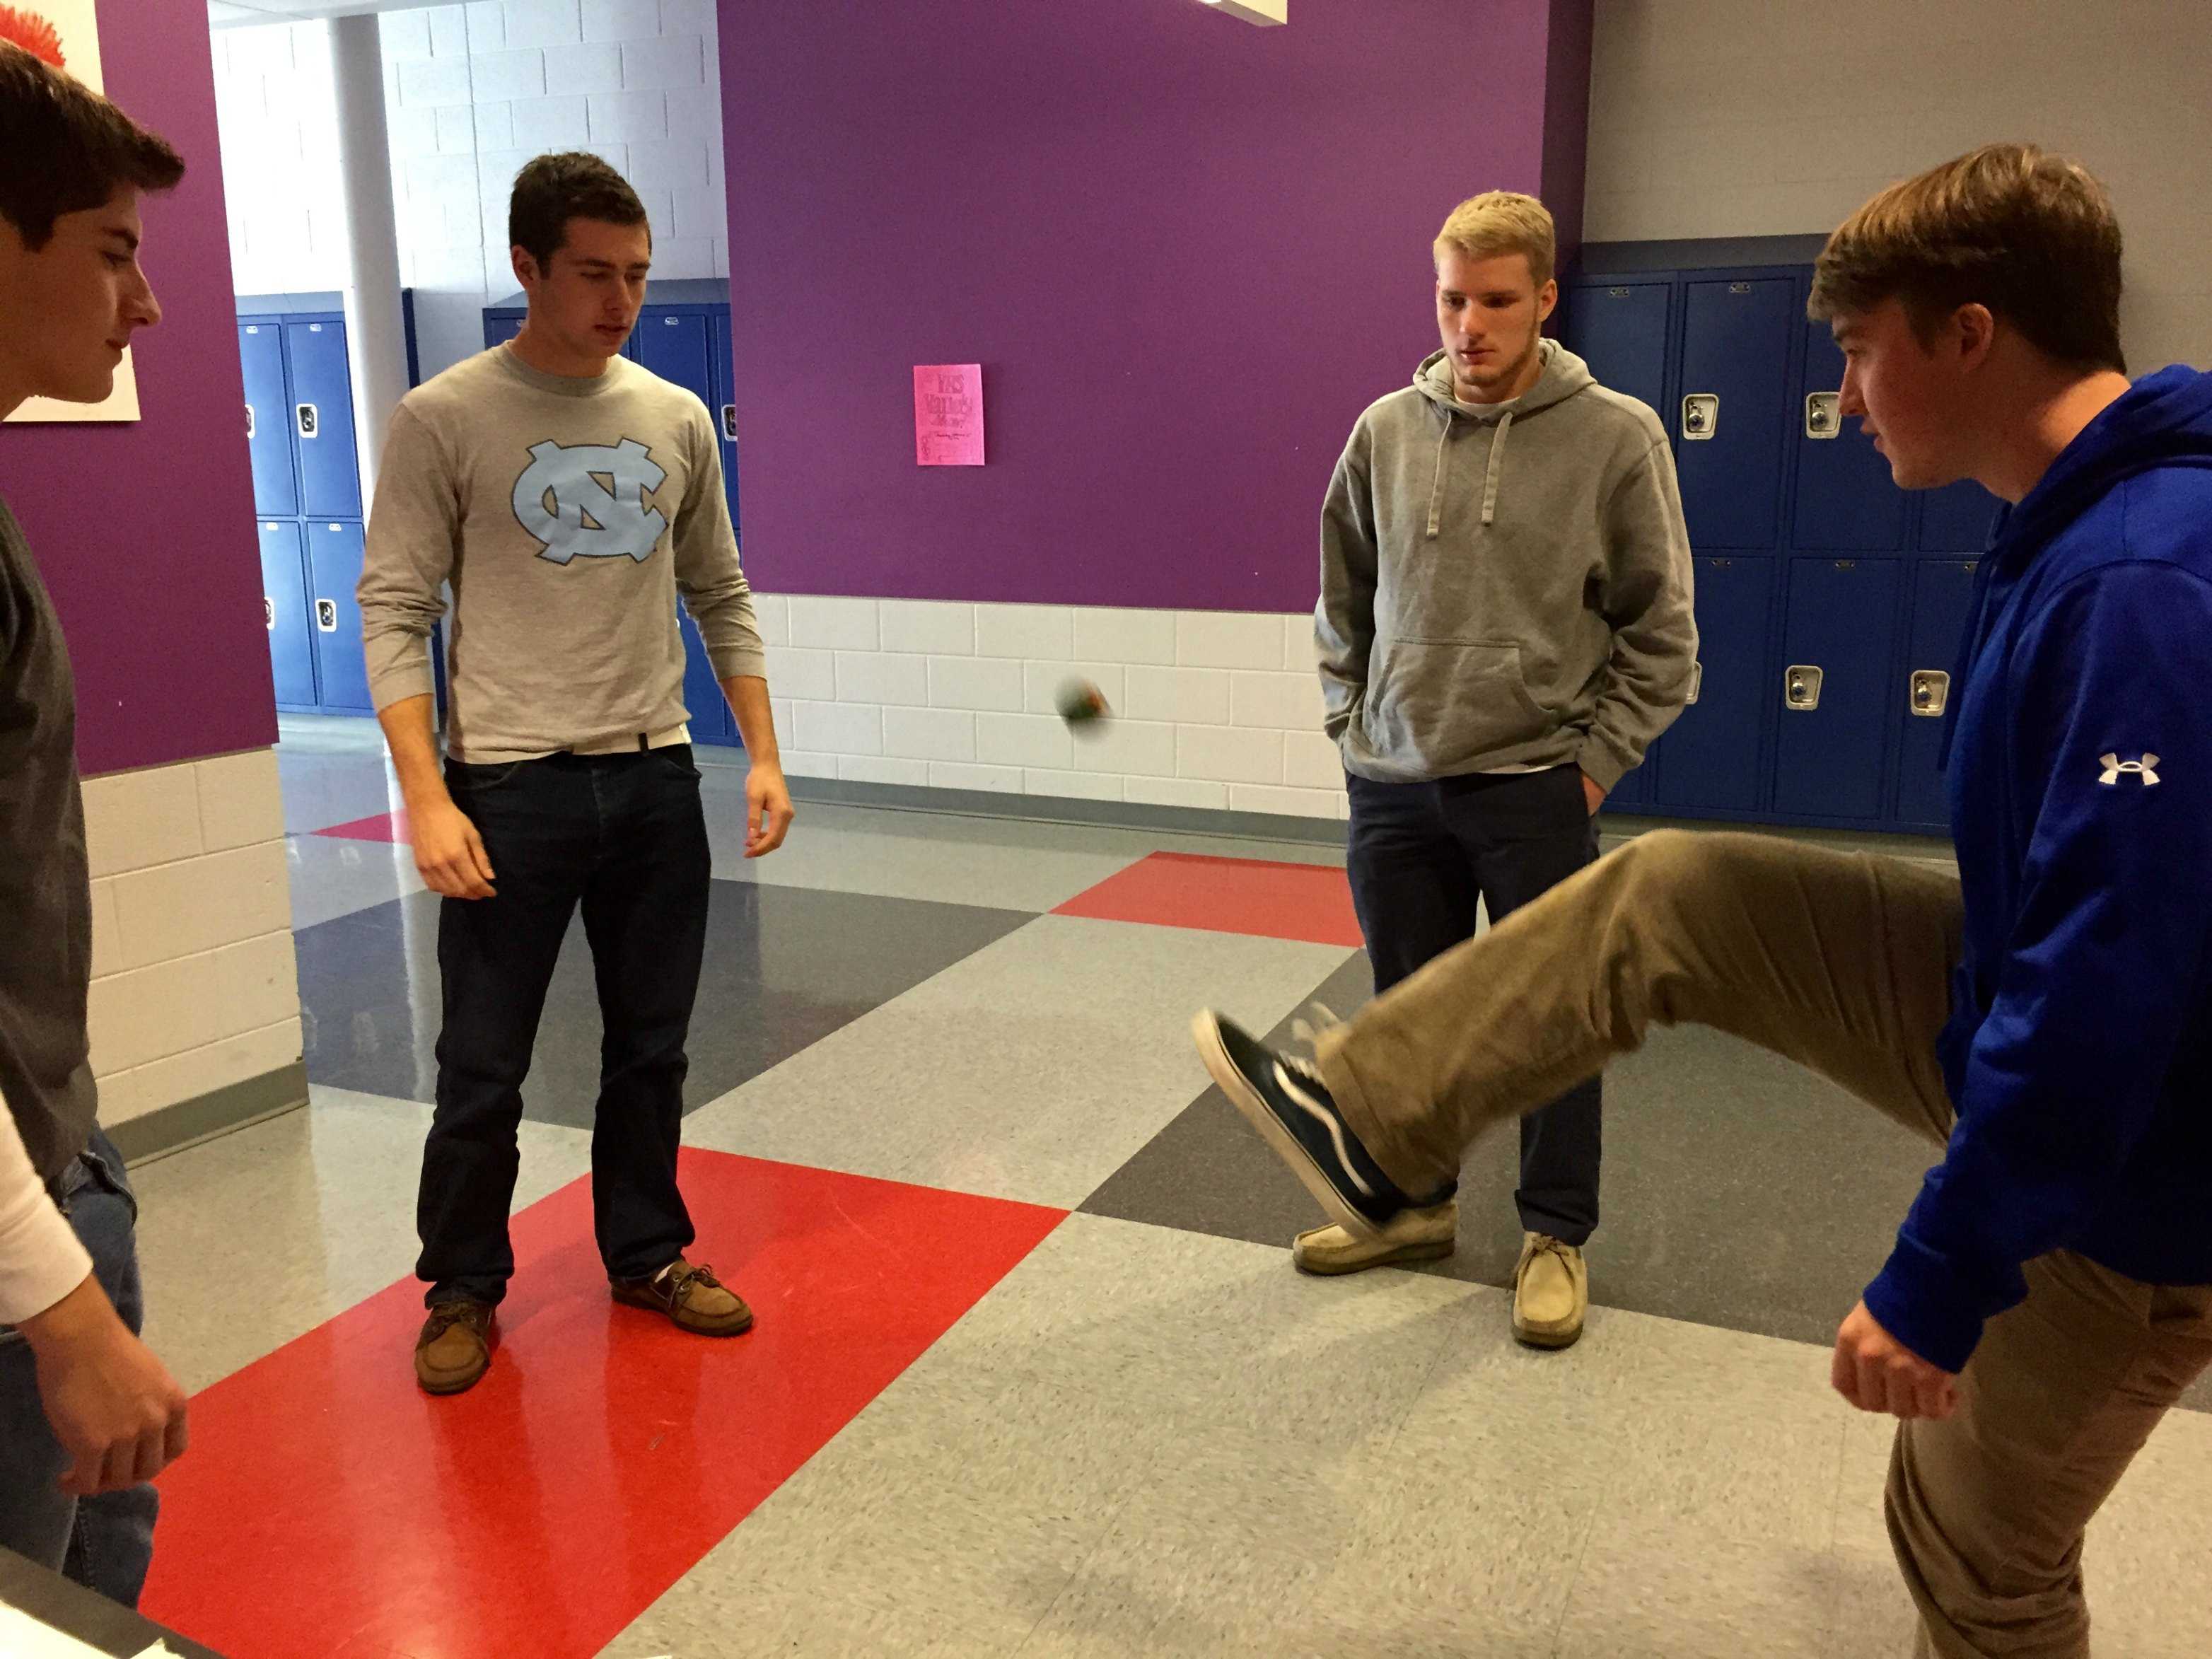 Four students hacky sack in the hallway at lunch.